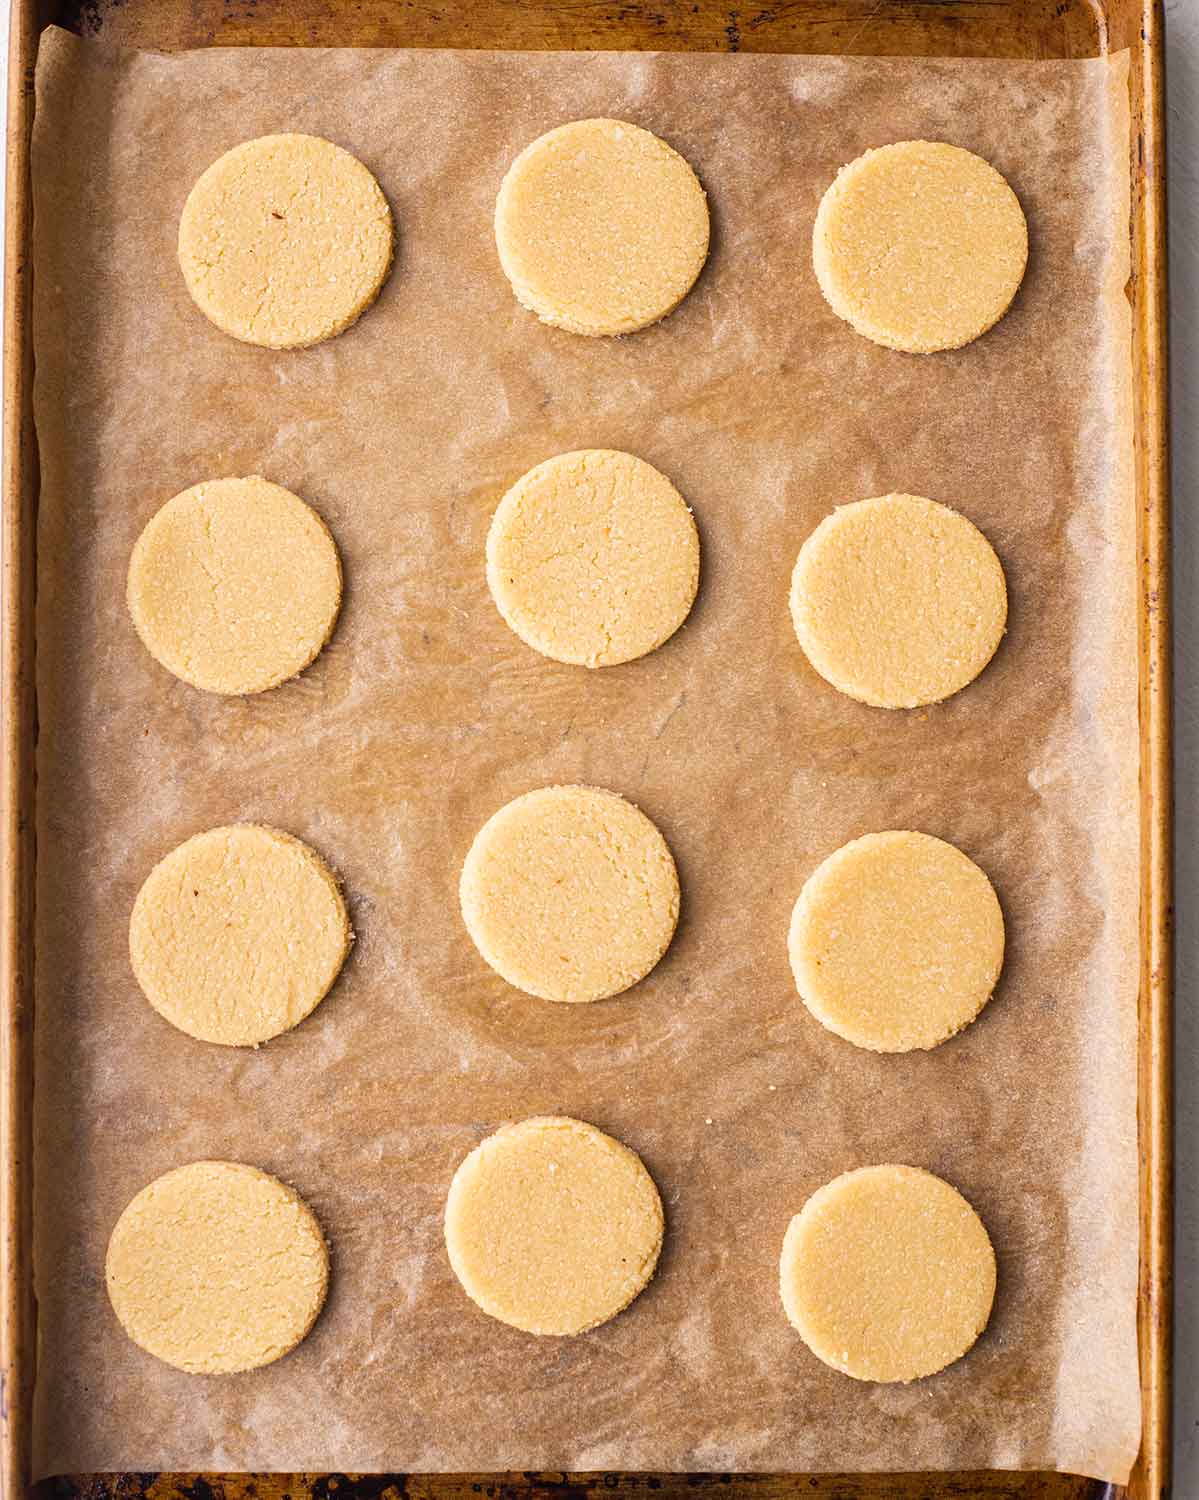 Lined baking tray of 12 unbaked vegan almond flour cookies.